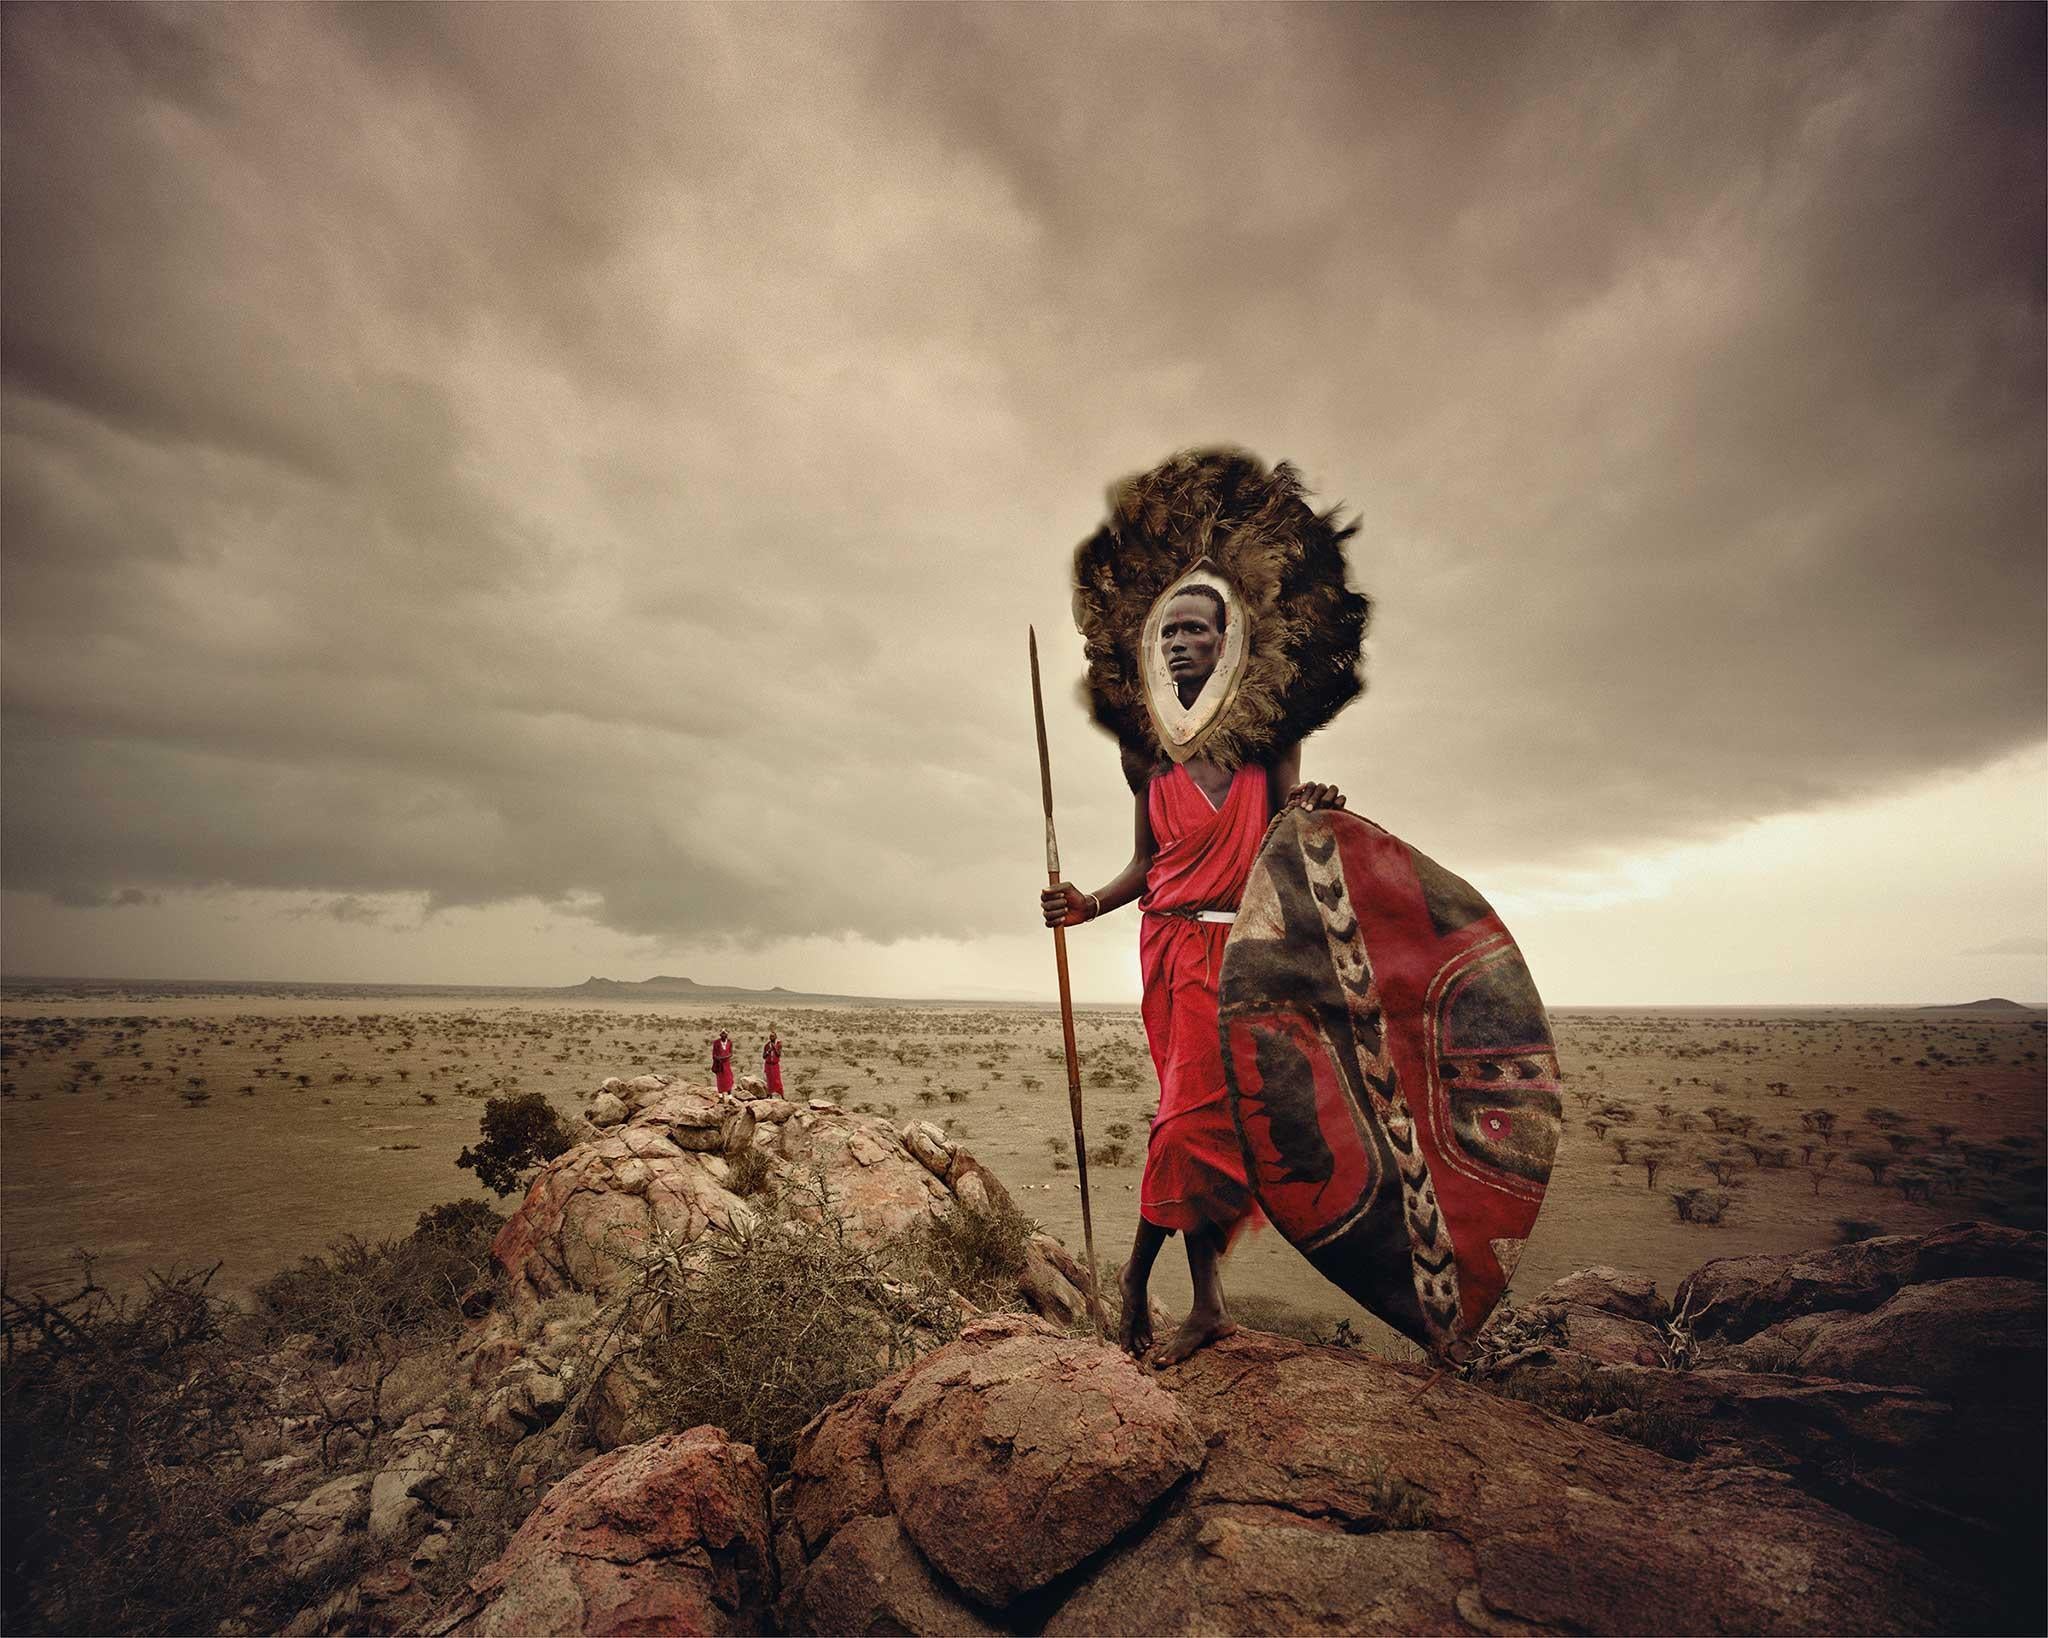 VIII 477 Sarbore, Tanzania, 2010

When the Maasai migrated from the Sudan in the 15th century, they attacked the indigenous groups they met along the way and raided cattle. By the end of their journey, they had taken over almost all of the land in